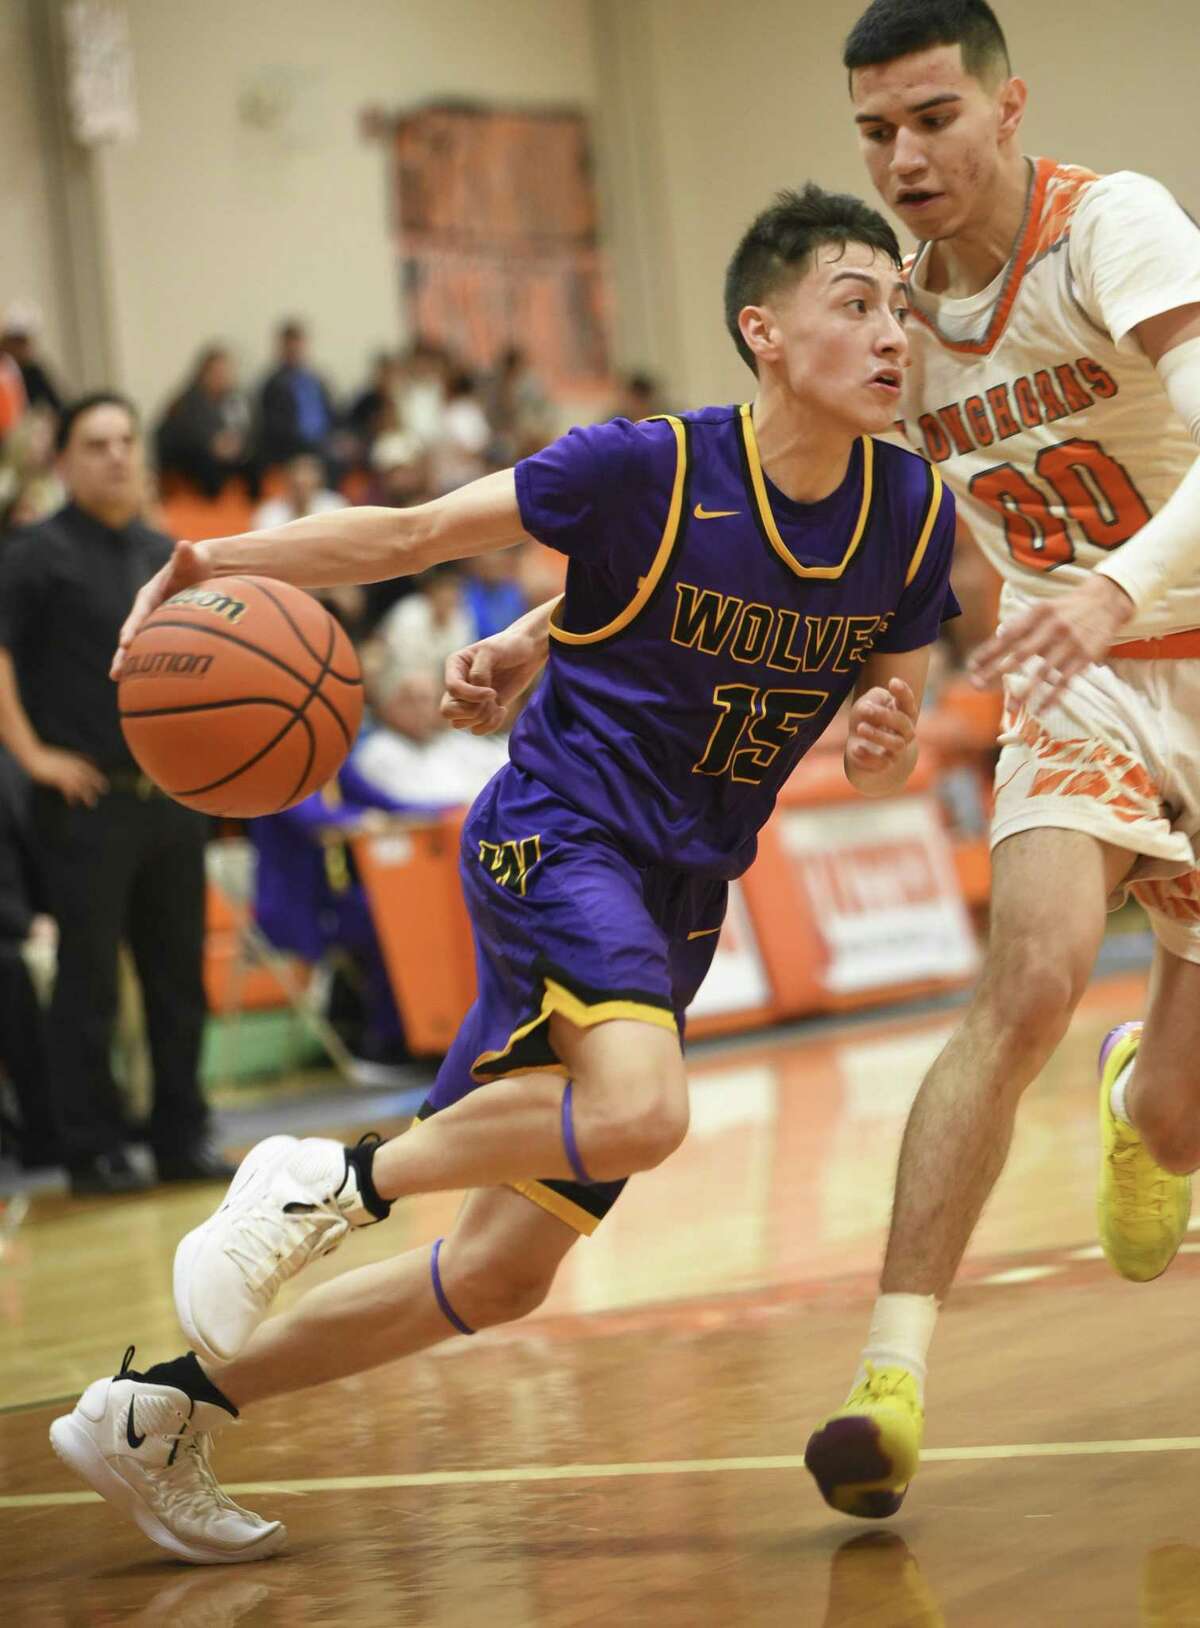 Chris Merino and LBJ host United at 7:30 p.m. Tuesday. The Longhorns won 65-47 when the teams met Dec. 21.